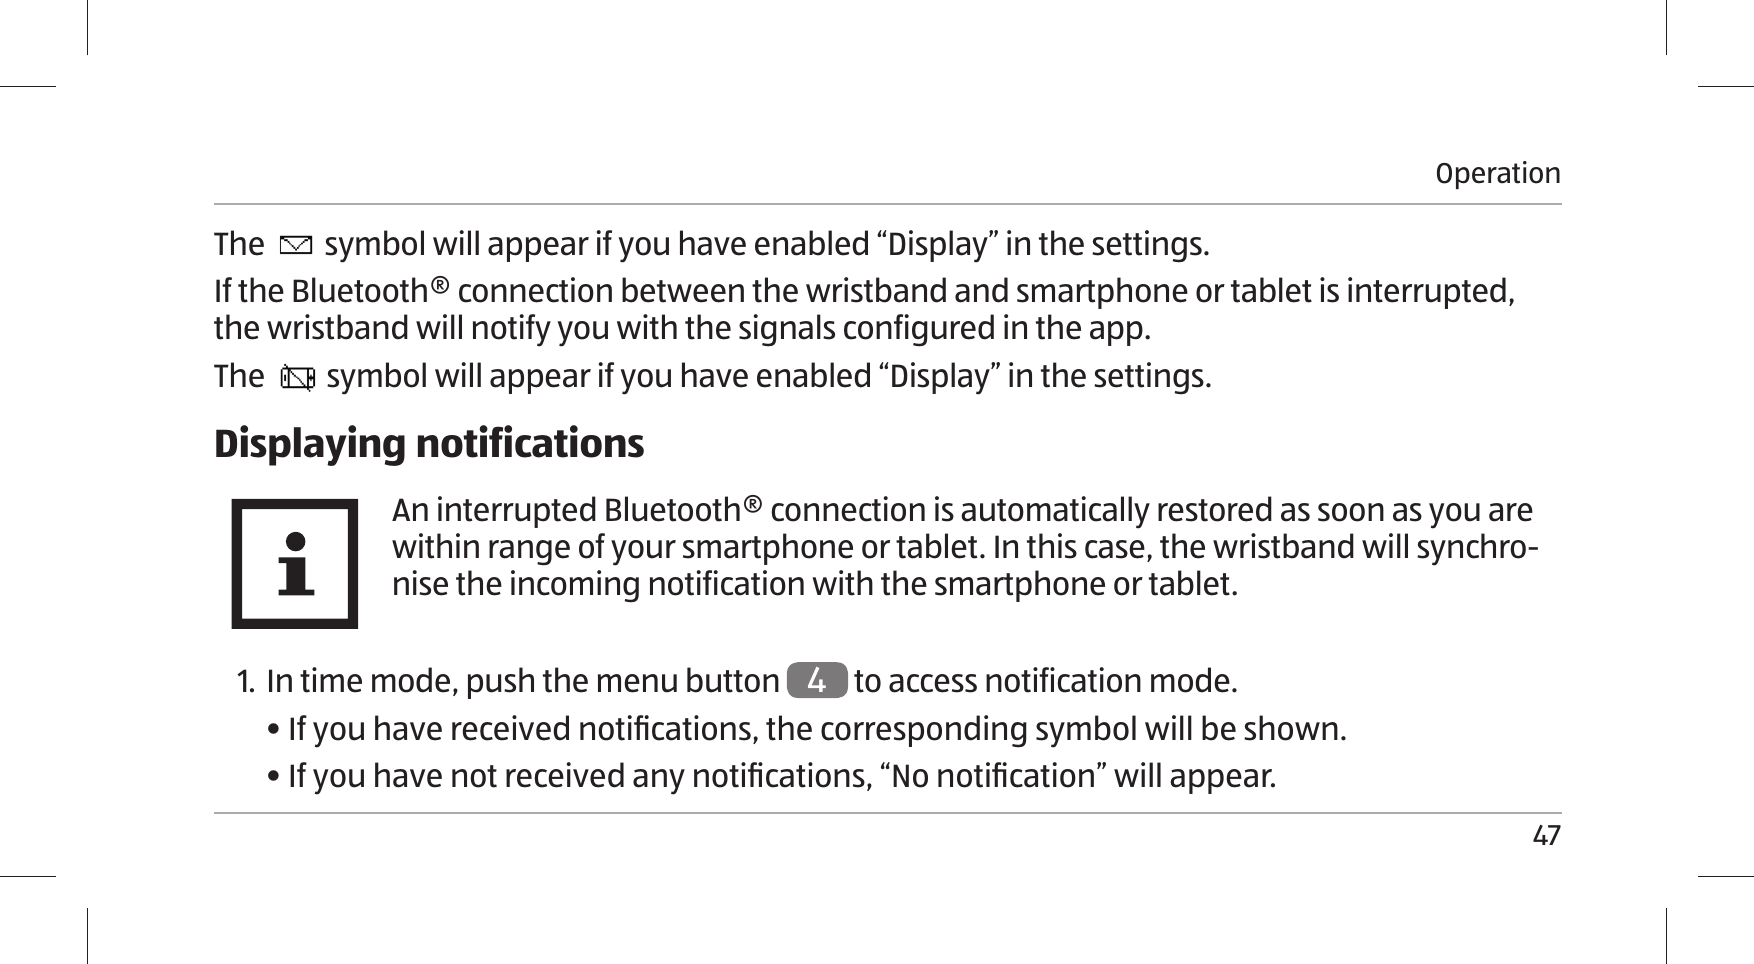 Operation47The   symbol will appear if you have enabled “Display” in the settings.If the Bluetooth® connection between the wristband and smartphone or tablet is interrupted, the wristband will notify you with the signals configured in the app. The   symbol will appear if you have enabled “Display” in the settings.Displaying notificationsAn interrupted Bluetooth® connection is automatically restored as soon as you are within range of your smartphone or tablet. In this case, the wristband will synchro-nise the incoming notification with the smartphone or tablet.1. In time mode, push the menu button  4 to access notification mode.• If you have received notiﬁ cations, the corresponding symbol will be shown.• If you have not received any notiﬁ cations, “No notiﬁ cation” will appear.